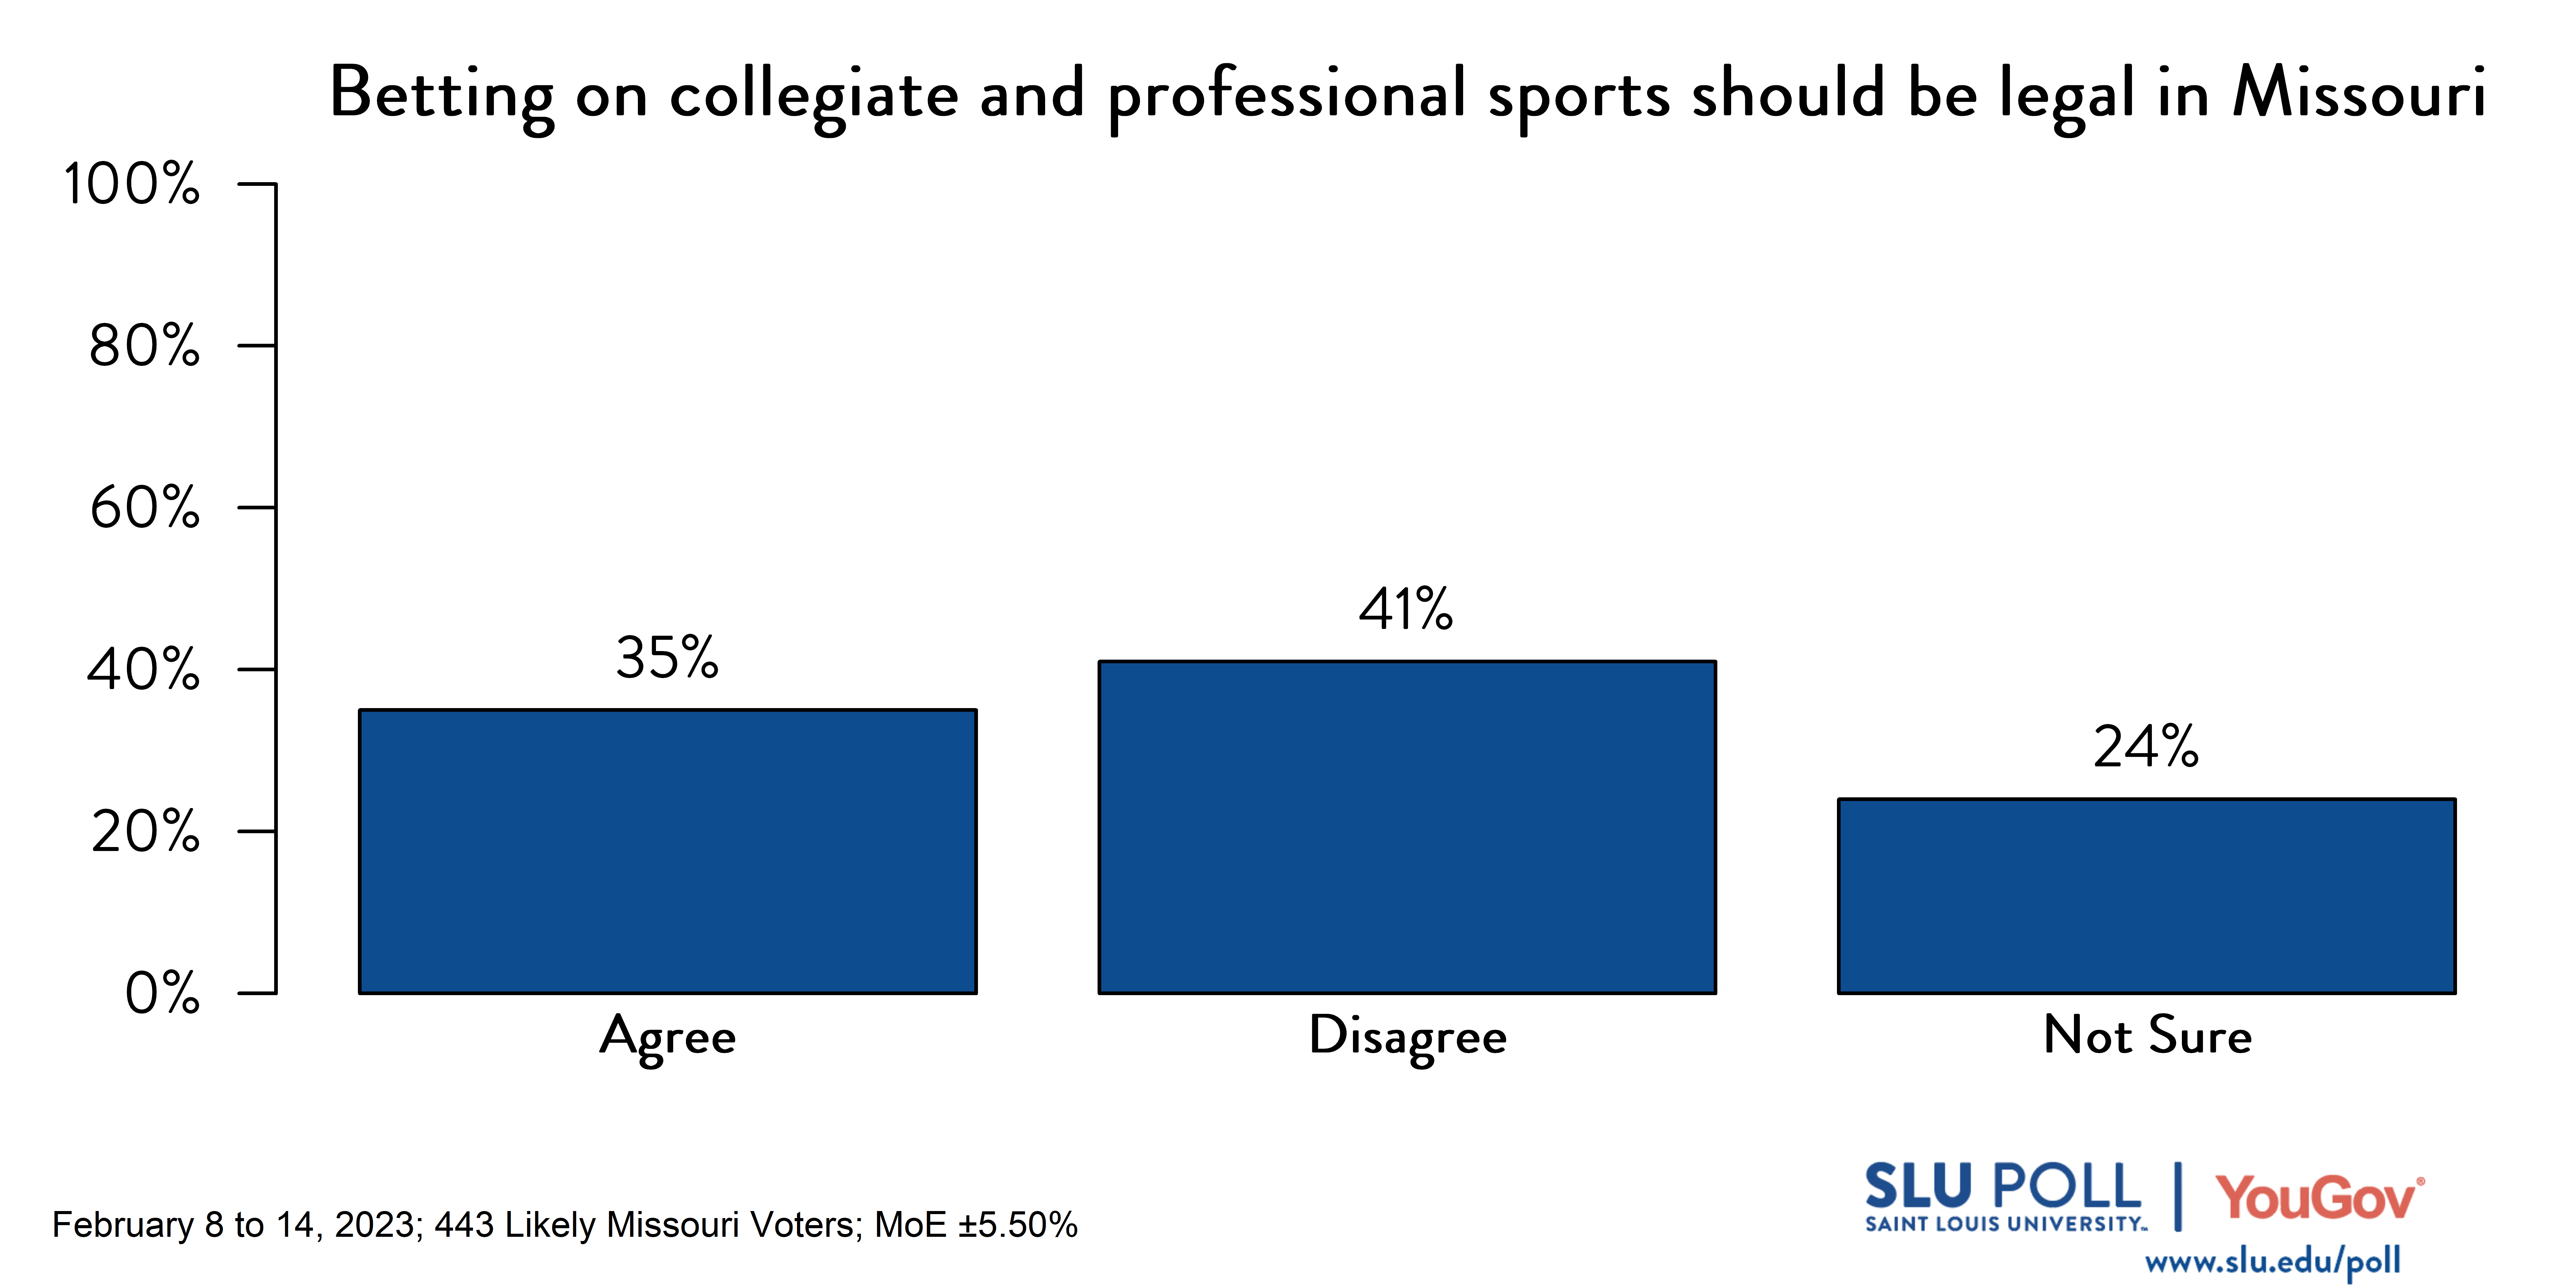 Likely voters' responses to 'Do you agree or disagree with the following statements: Betting on collegiate and professional sports should be legal in Missouri?': 35% Agree, 41% Disagree, and 24% Not sure.